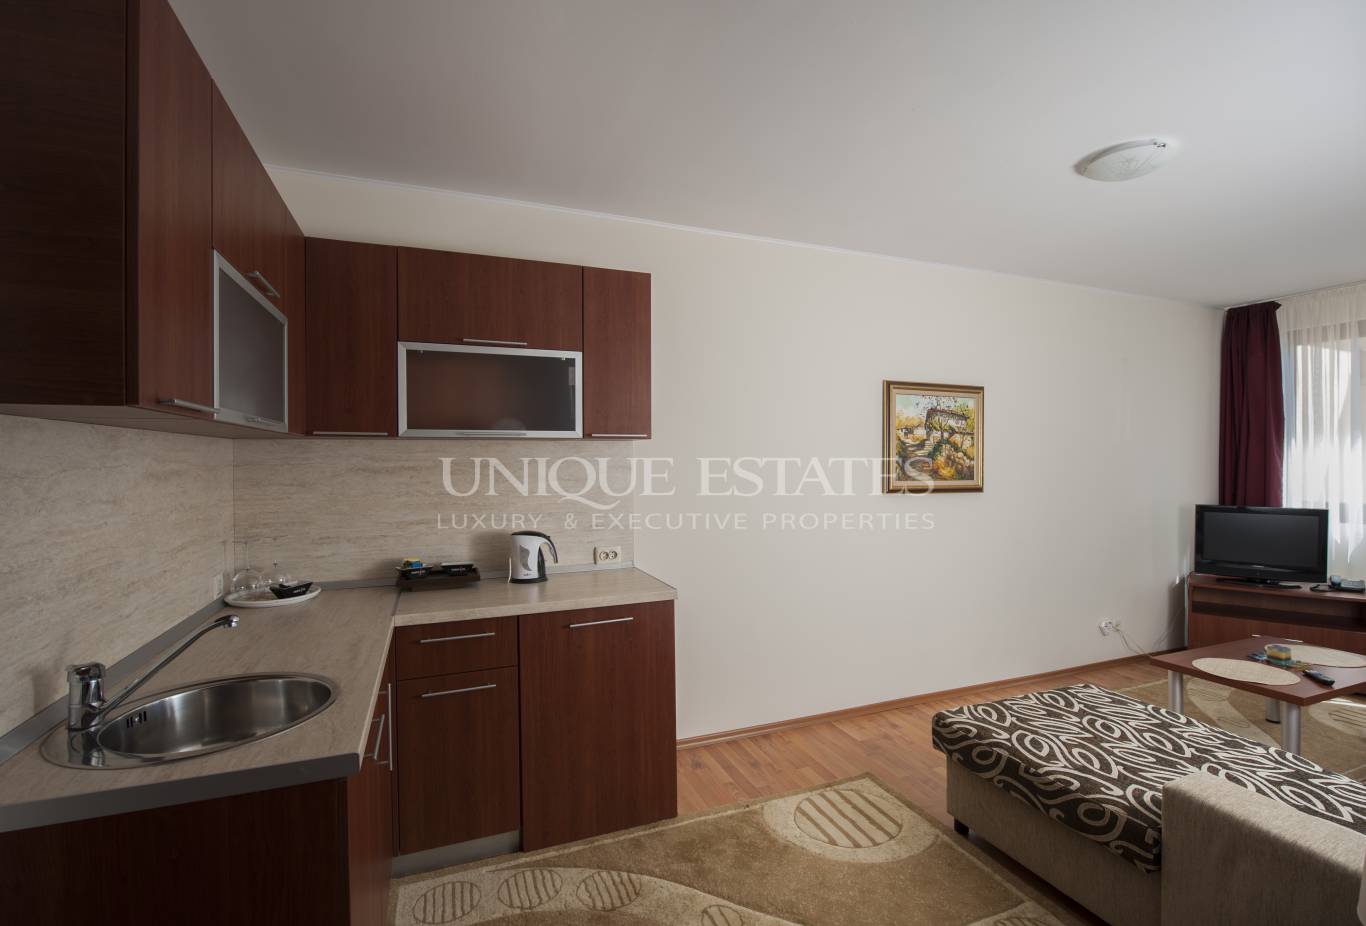 Hotel / Apartment house for sale in Sofia, Vladaya with listing ID: K10953 - image 10